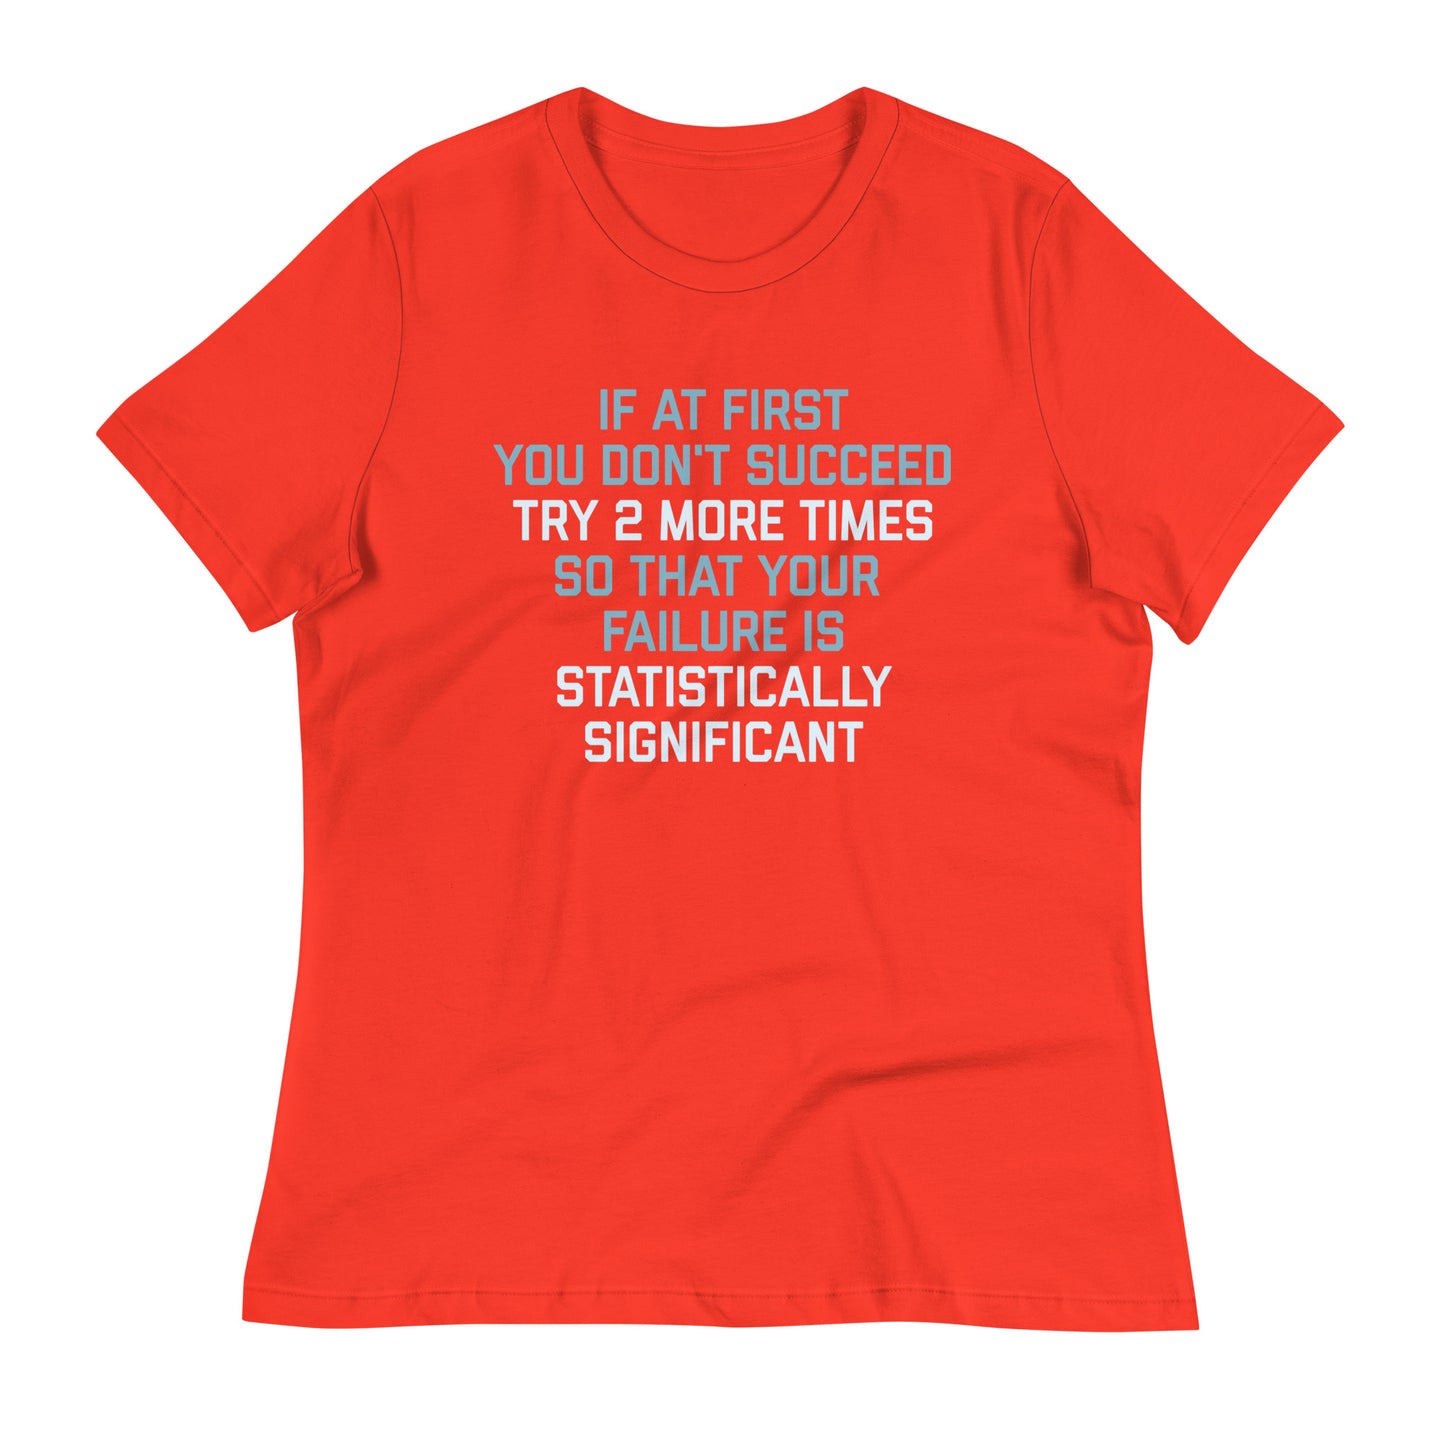 Try 2 More Times So That Your Failure Is Statistically Significant Women's Signature Tee